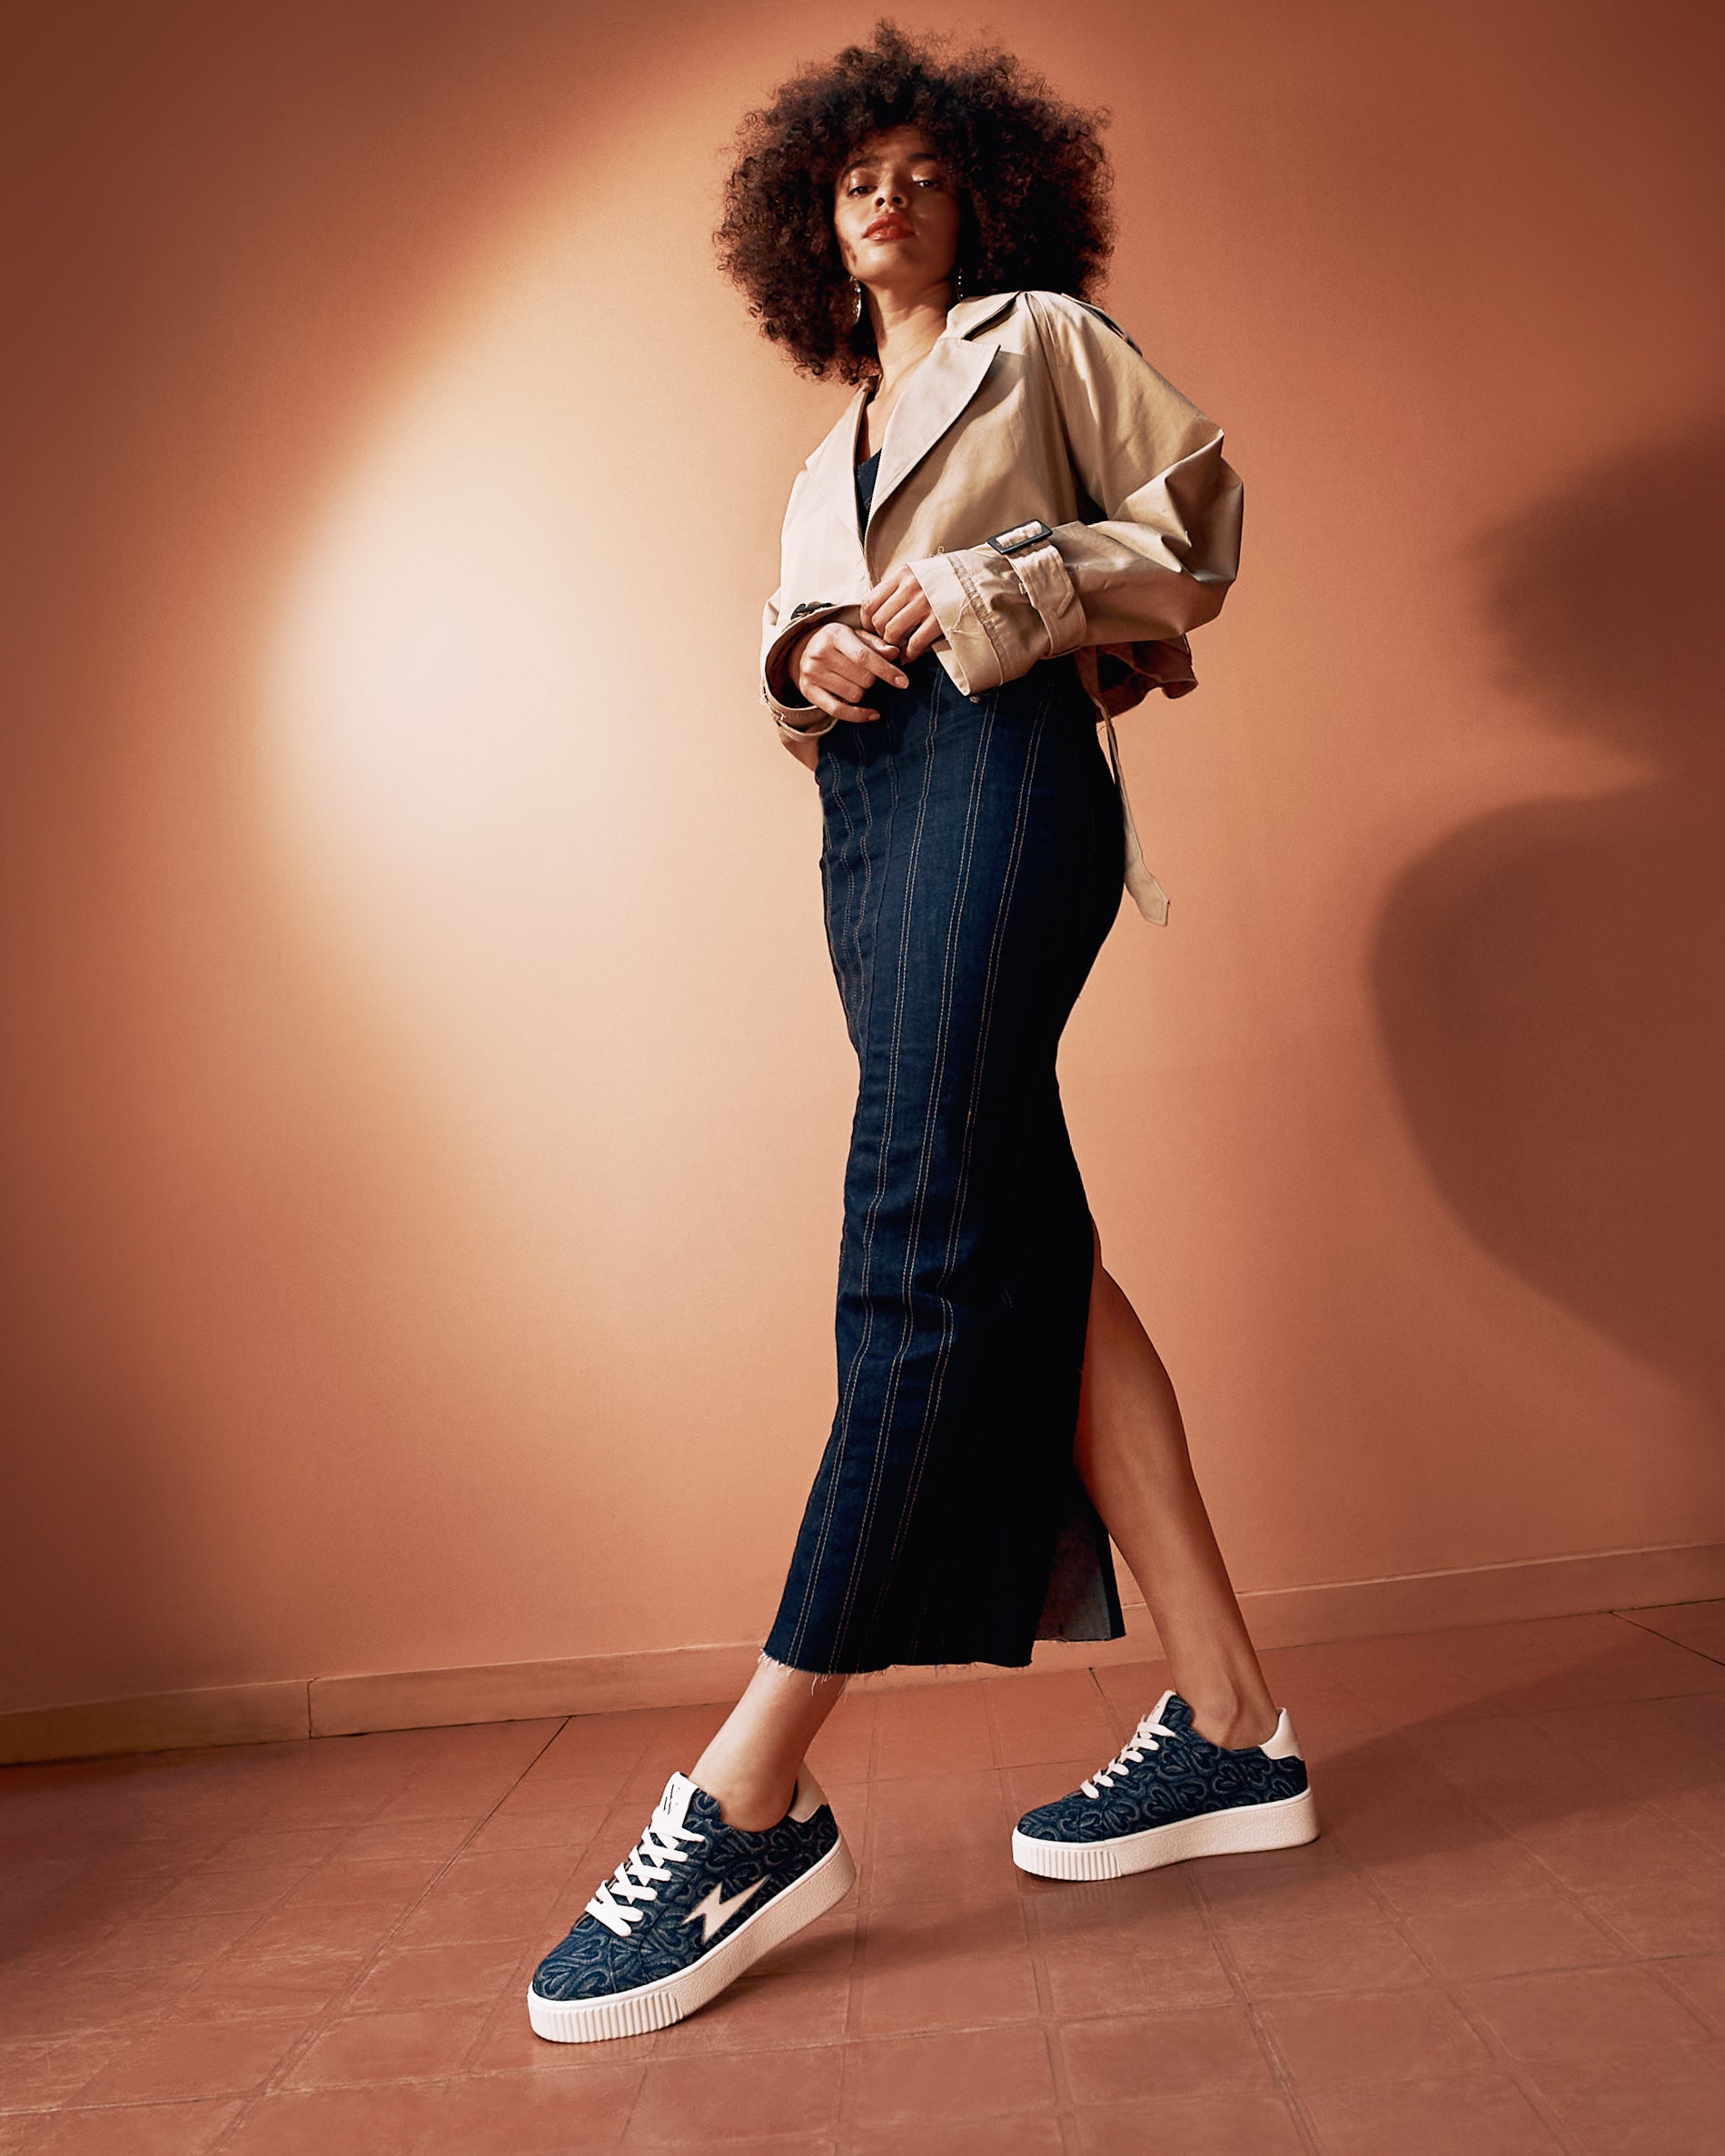 The Enola denim heart lace-up storm sneakers with a denim dress and a short trench coat